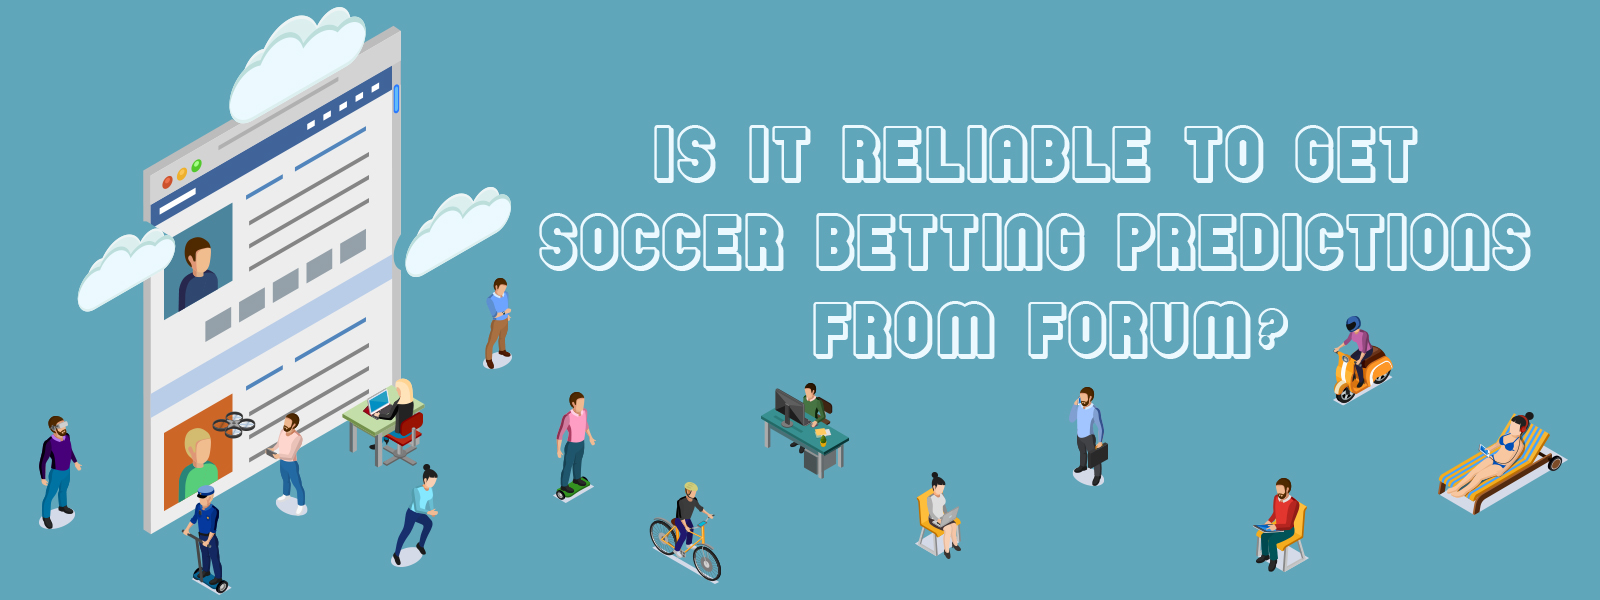 Getting Soccer Betting Predictions From Forum